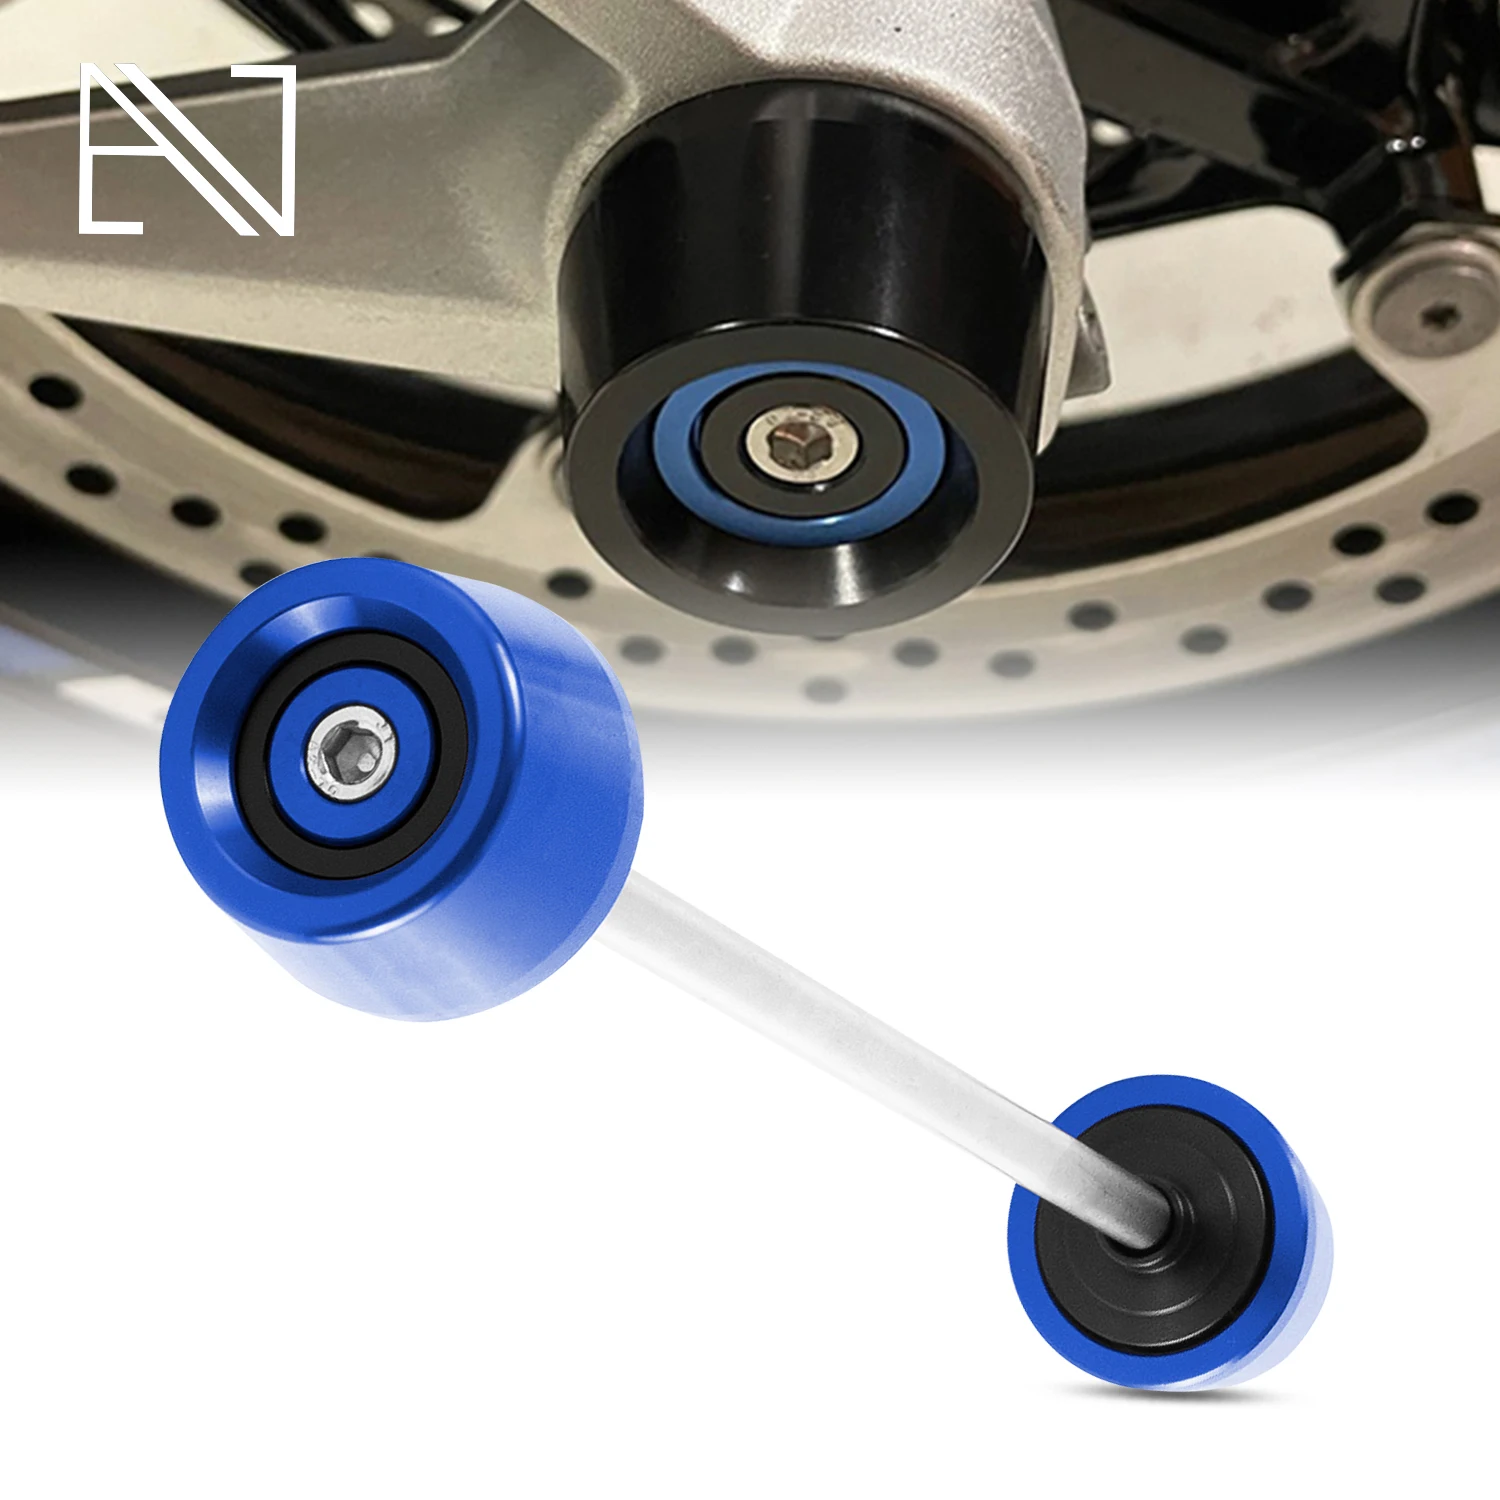 Enlarge Motorcycle Front Axle Slider Wheel Crash Pads Protector For BMW S1000XR 2014-2018 S1000R 2014-2017 S1000RR 2010-2022